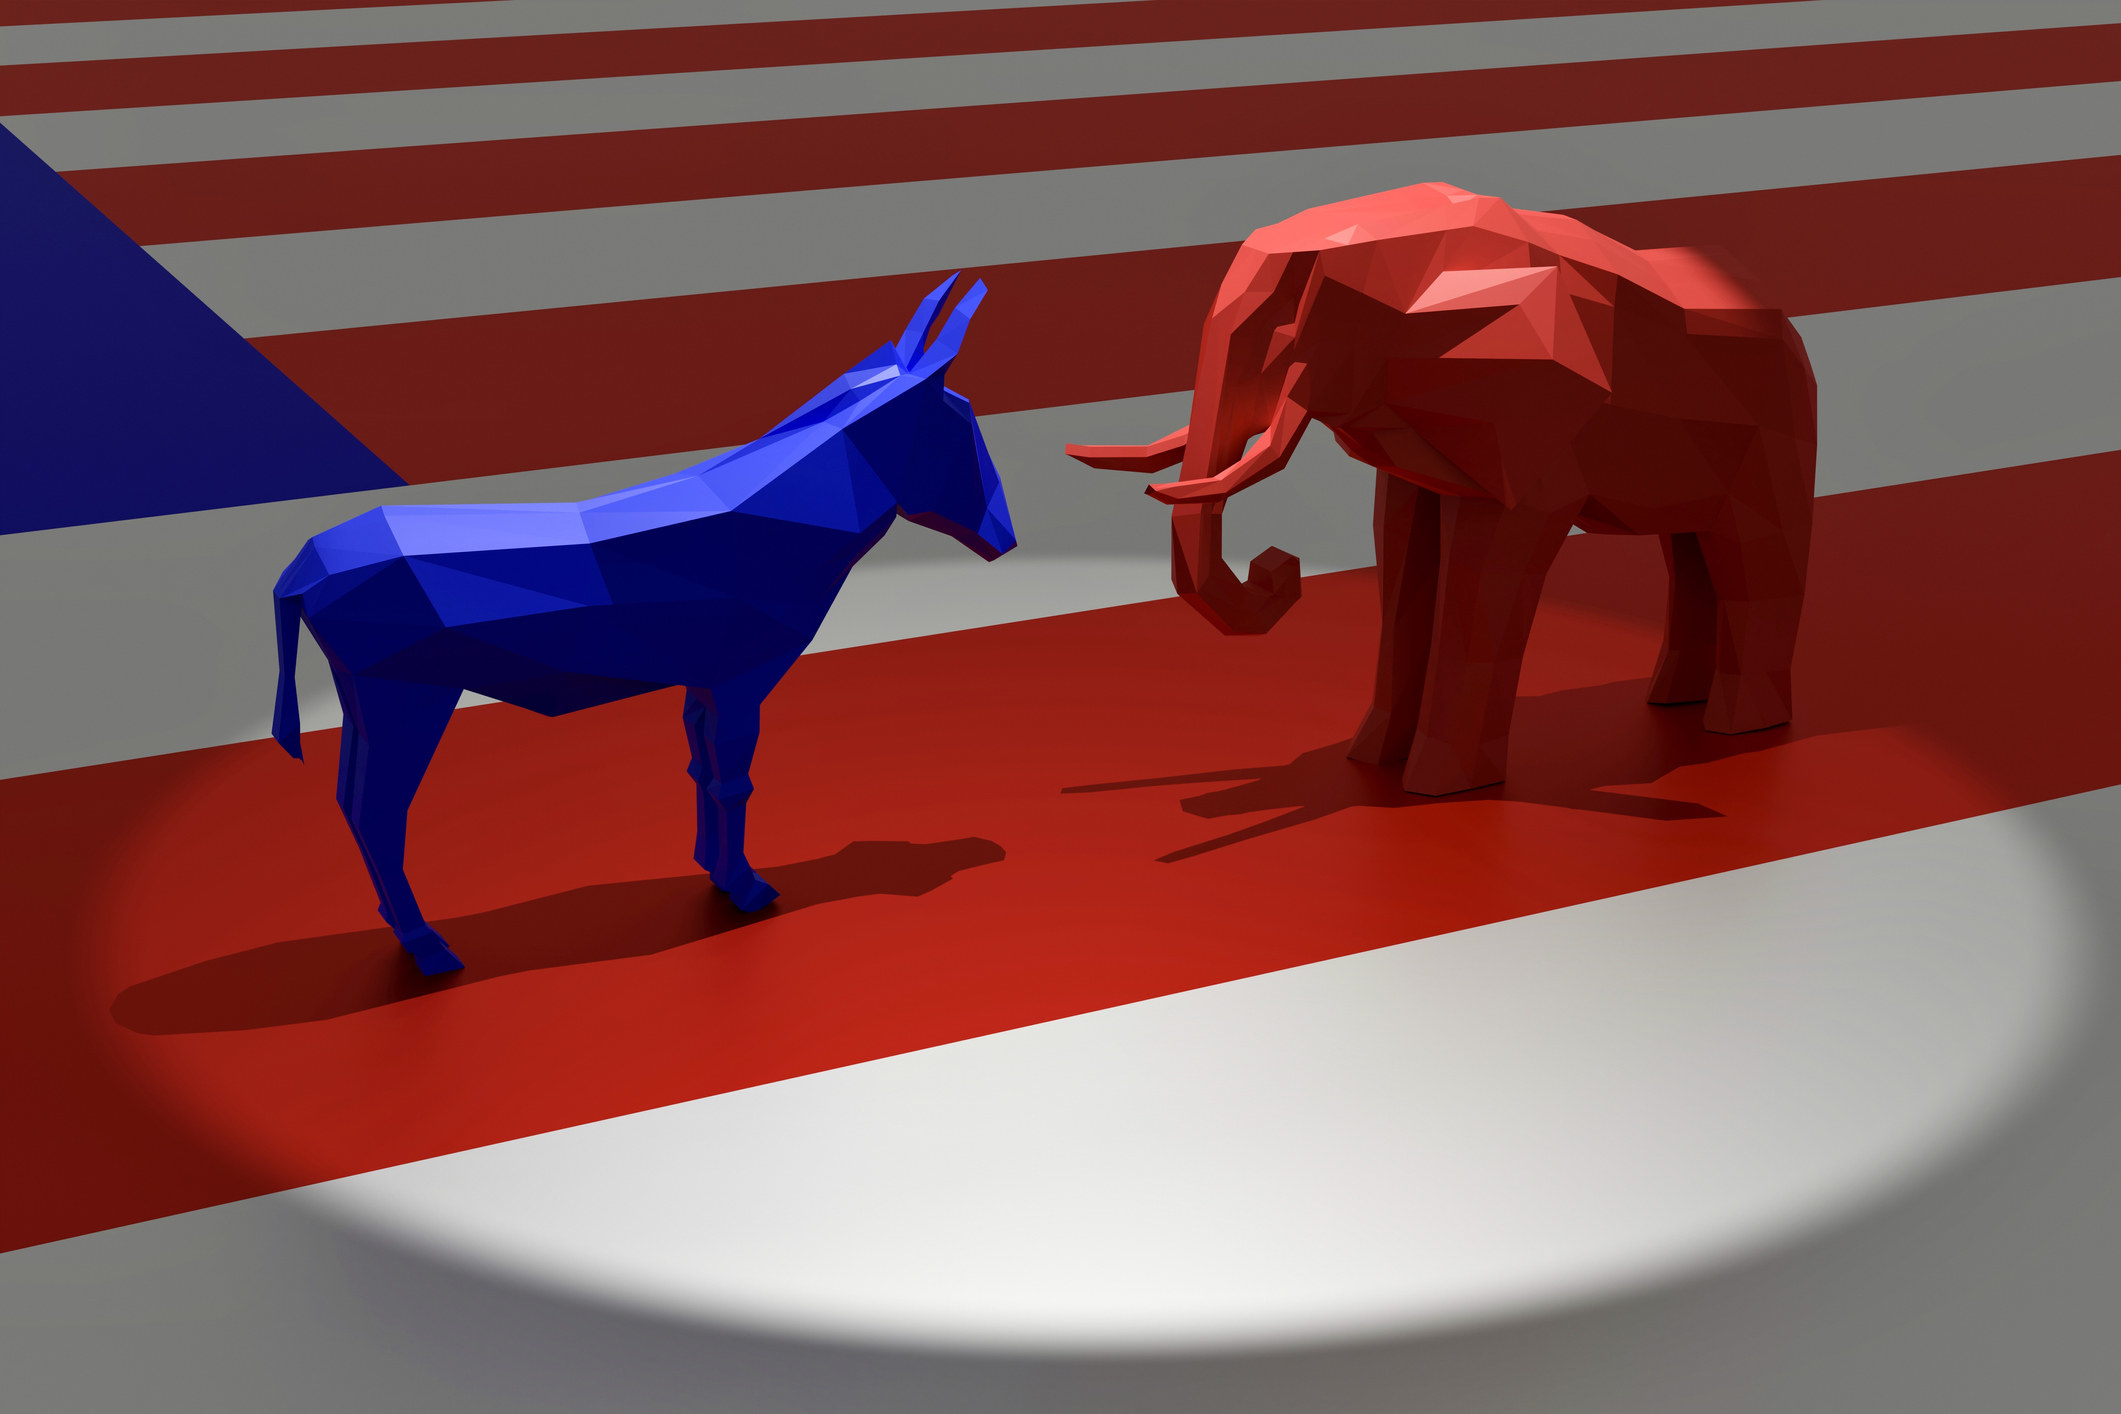 A blue donkey and a red elephant figure facing each other against a US flag-type backdrop